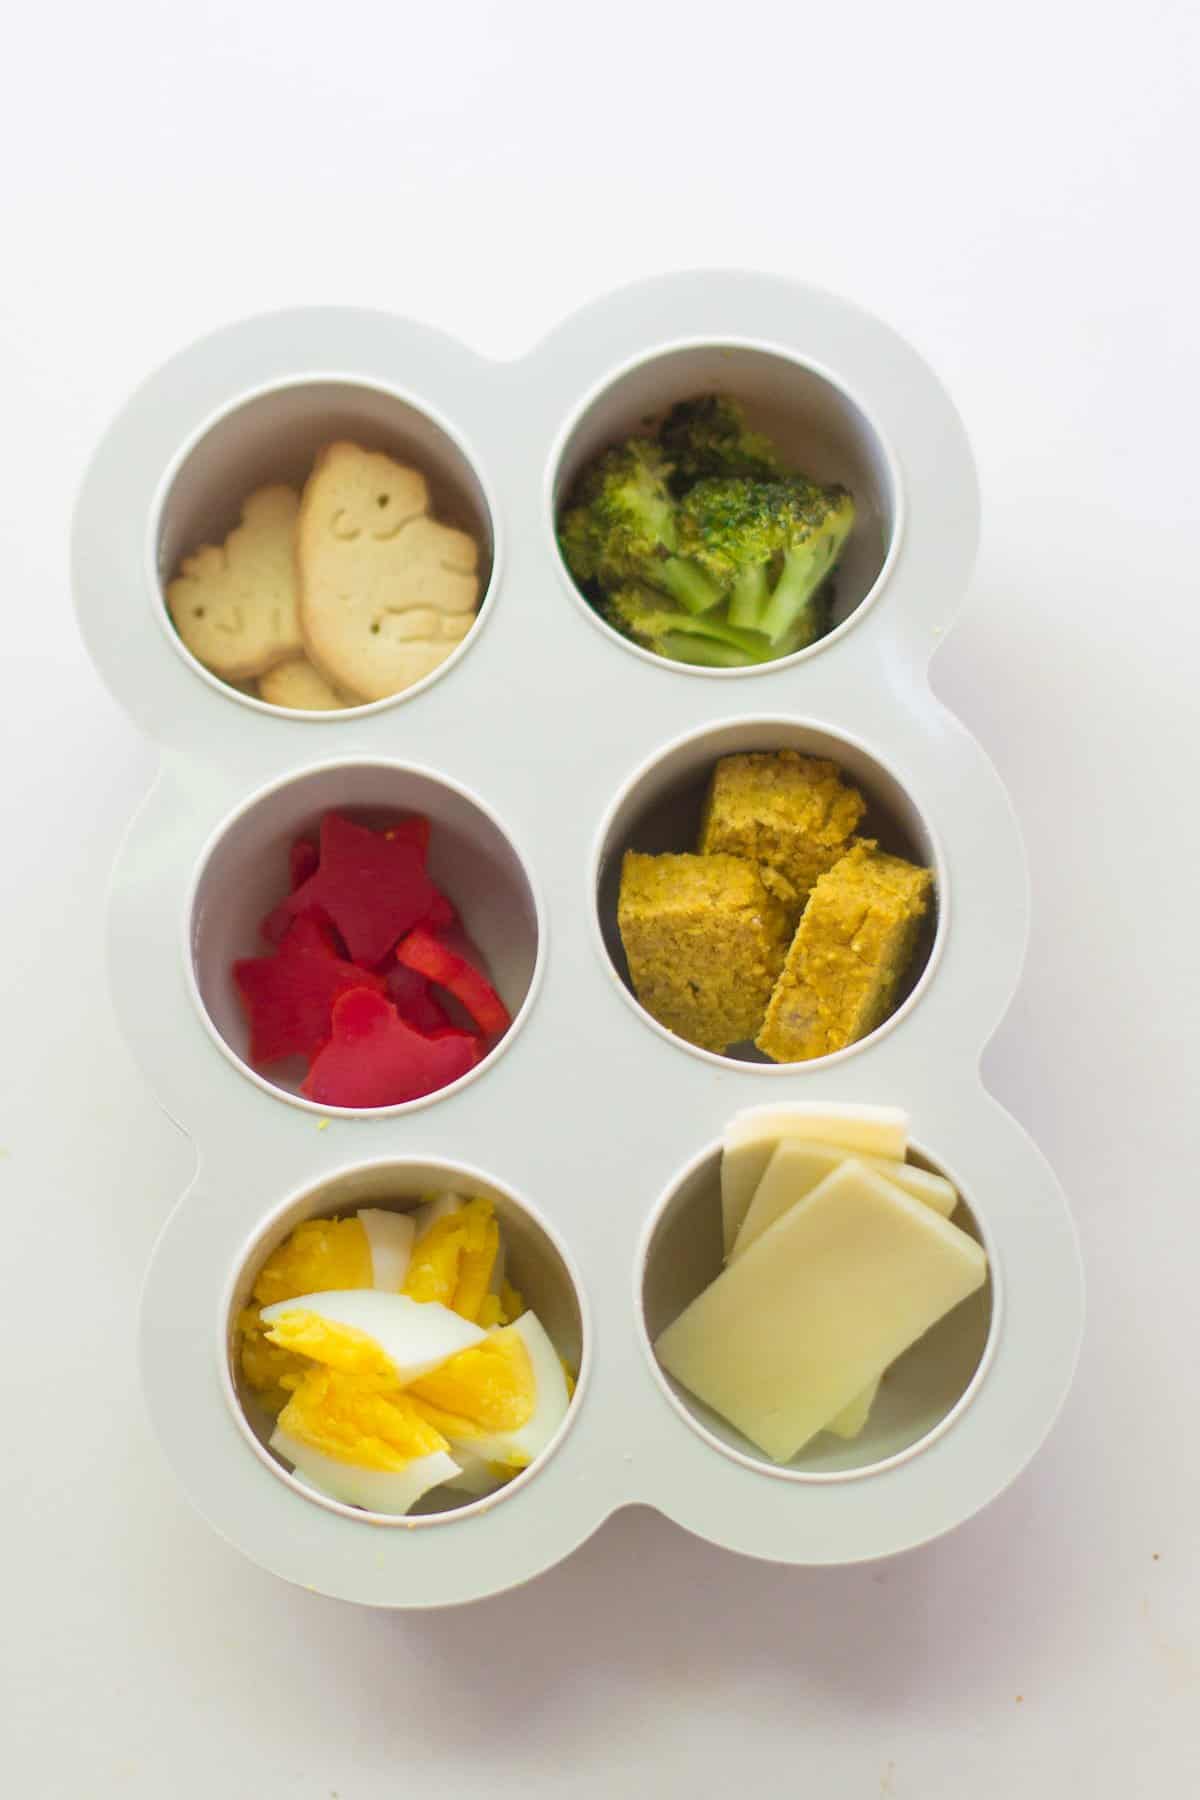 https://www.mjandhungryman.com/wp-content/uploads/2022/06/Muffin-tin-snack-for-toddlers.jpg